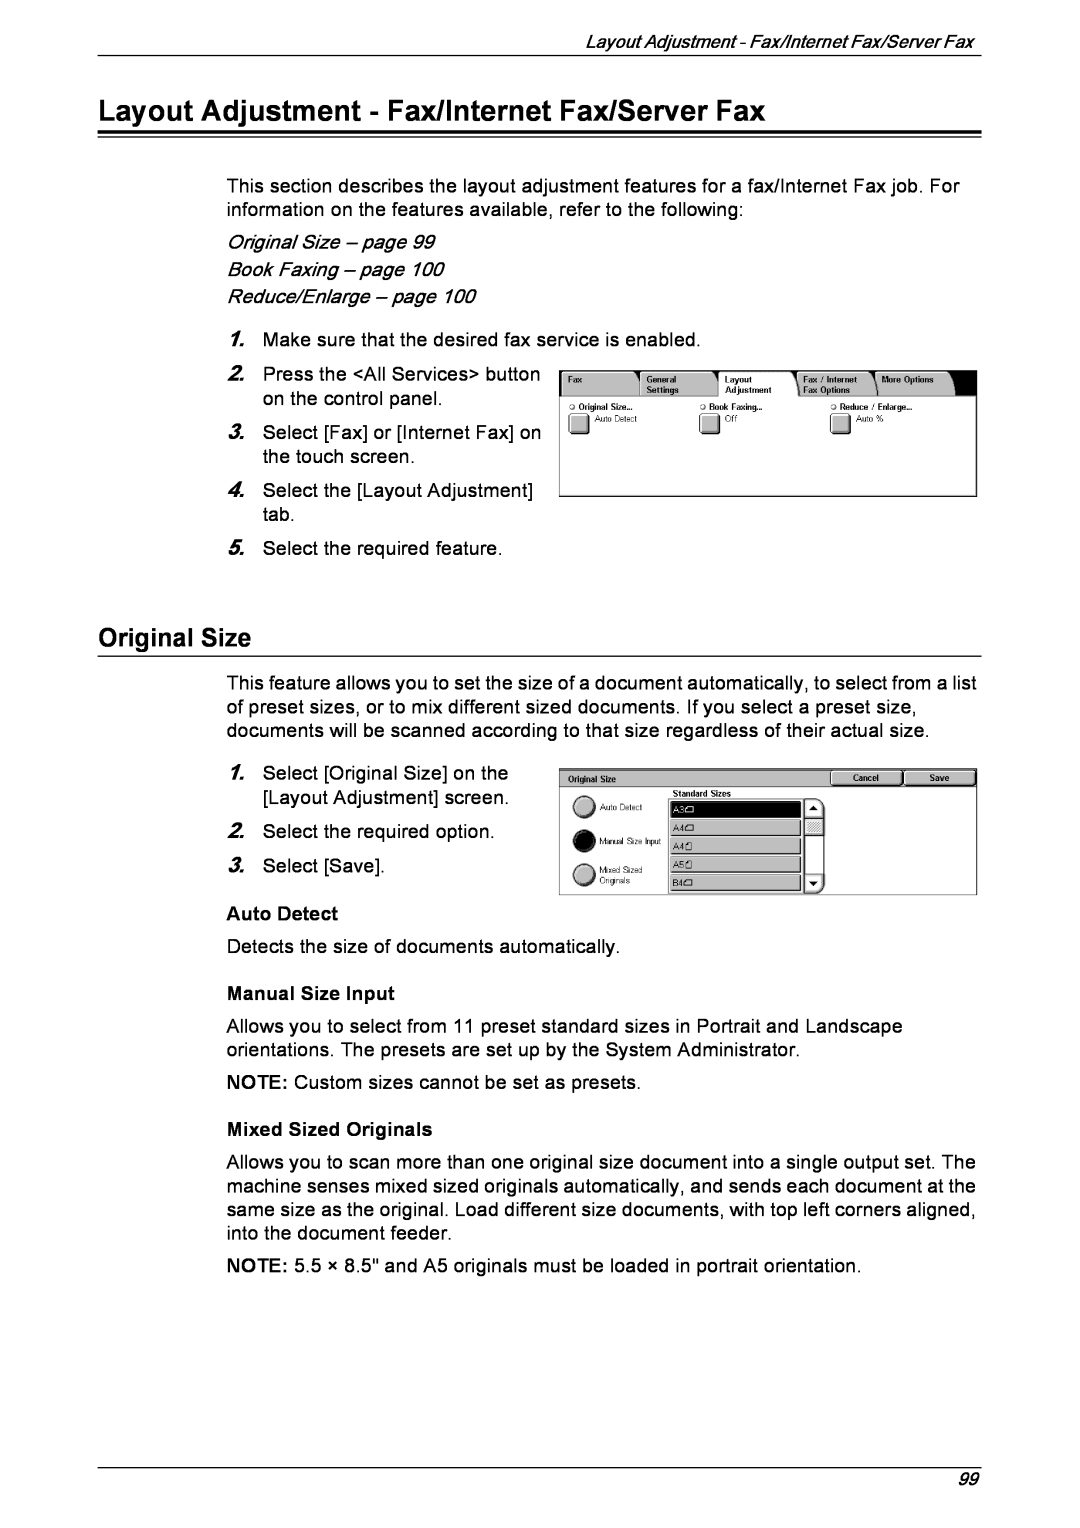 Xerox 5230 Layout Adjustment - Fax/Internet Fax/Server Fax, Original Size – page Book Faxing – page, Reduce/Enlarge – page 